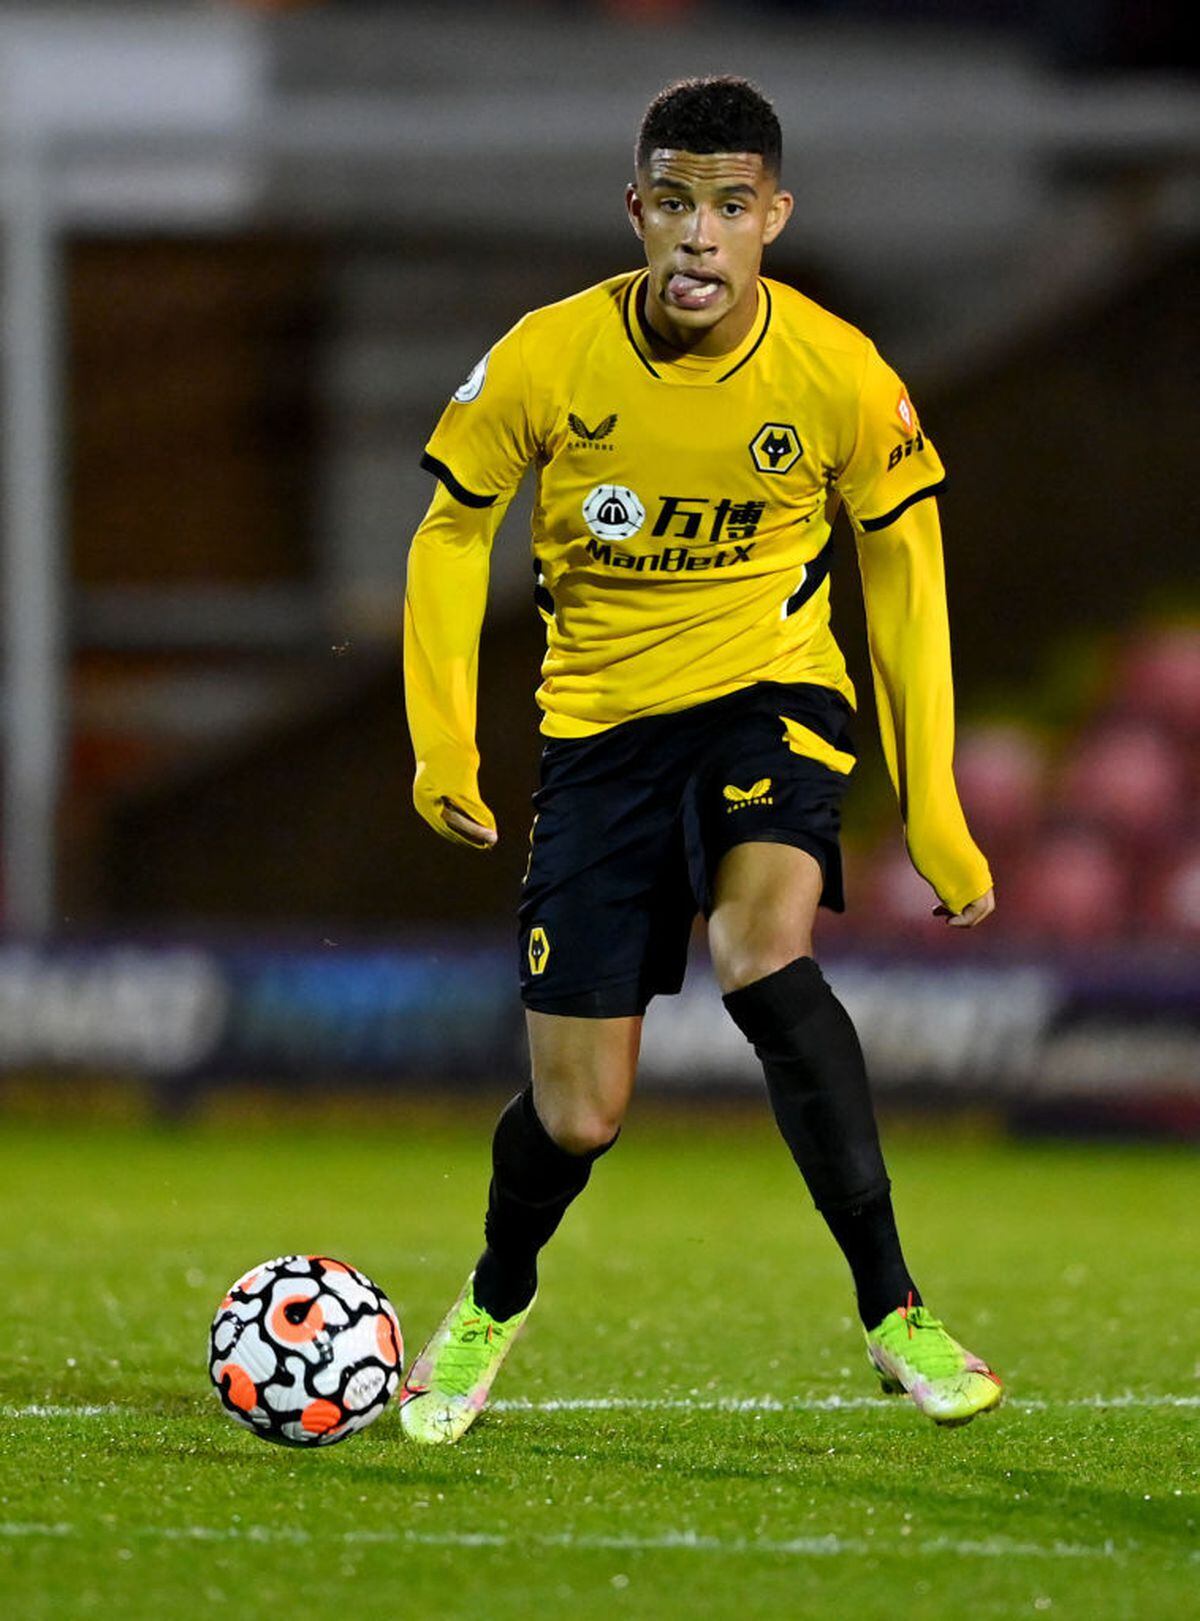 Chem Campbell of Wolverhampton Wanderers runs with the ball. (Photo by Sam Bagnall - WWFC/Wolves via Getty Images).